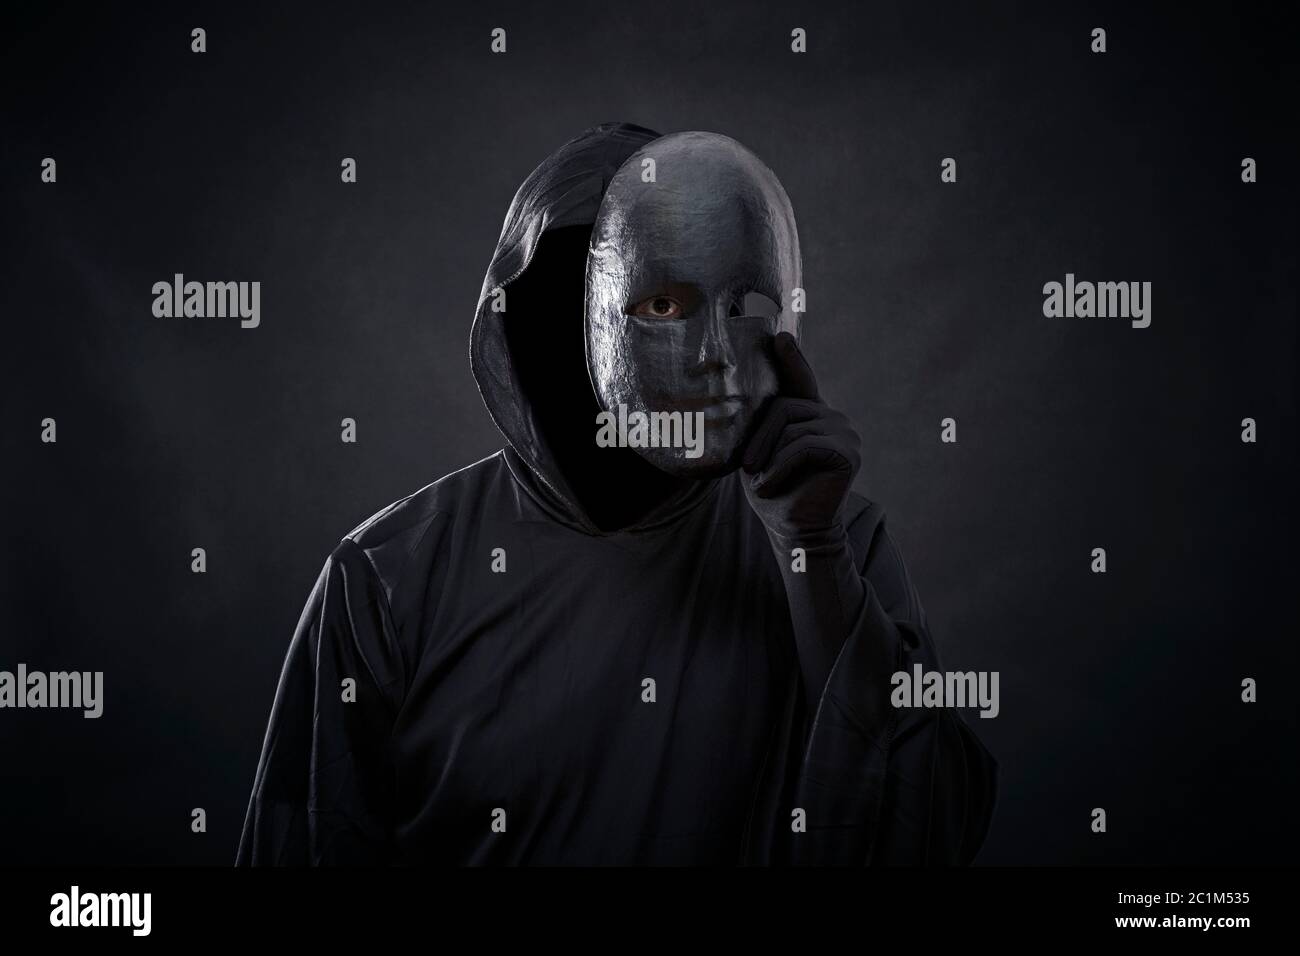 Scary figure in hooded cloak with mask in hand Stock Photo